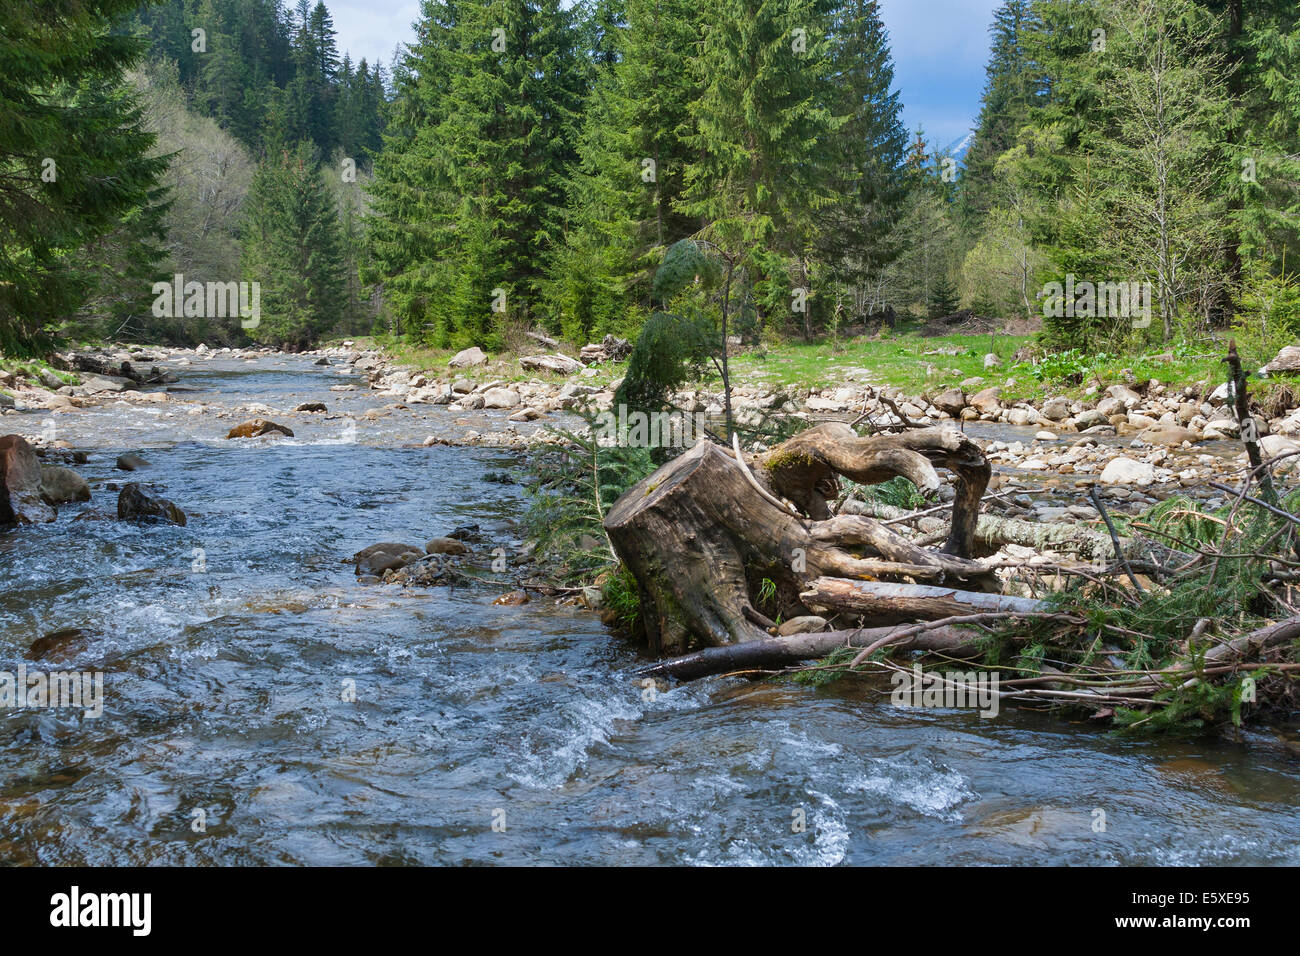 Carpathians landscape with tree trunk, forest and mountain river Stock Photo